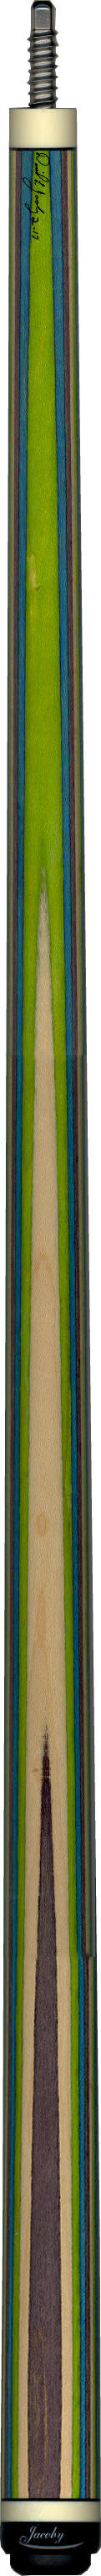 Jacoby 020317 Pool cue